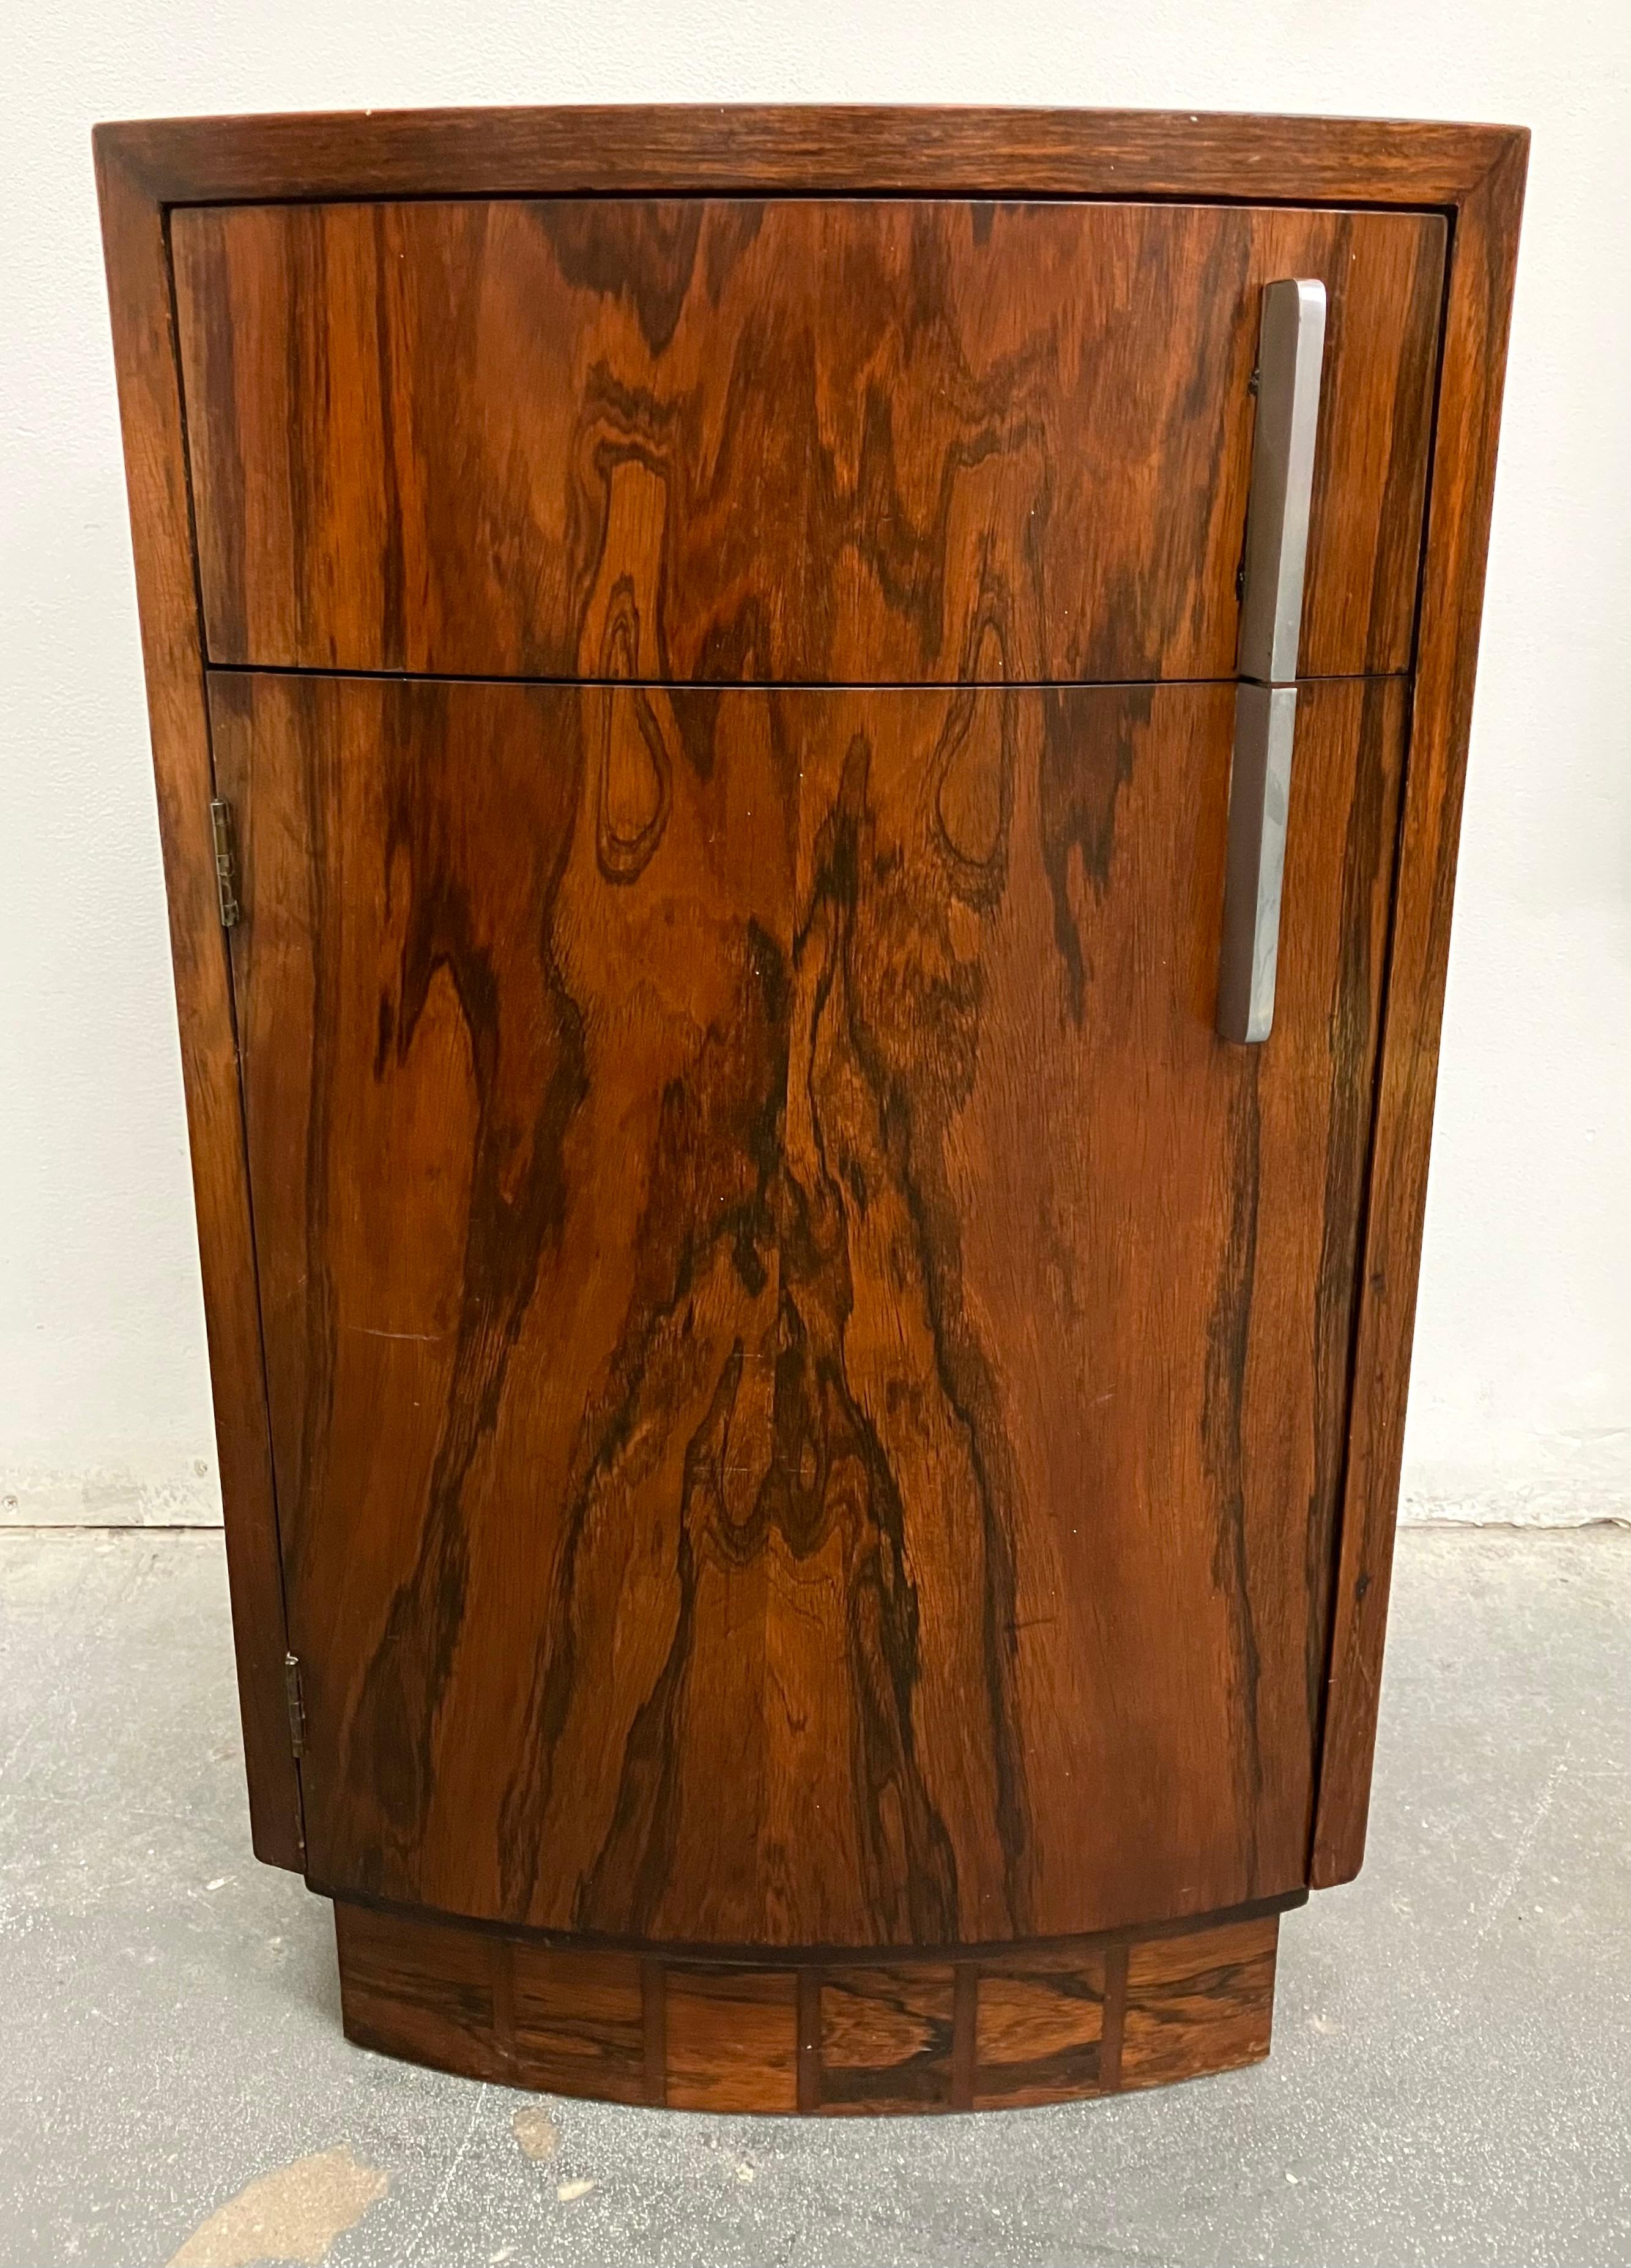 Rarely seen nightstand by Gilbert Rohde in beautifully figured burled rosewood with thin steel pulls. Features one drawer and a larger lower compartment. Model # 3770 for Herman Miller.